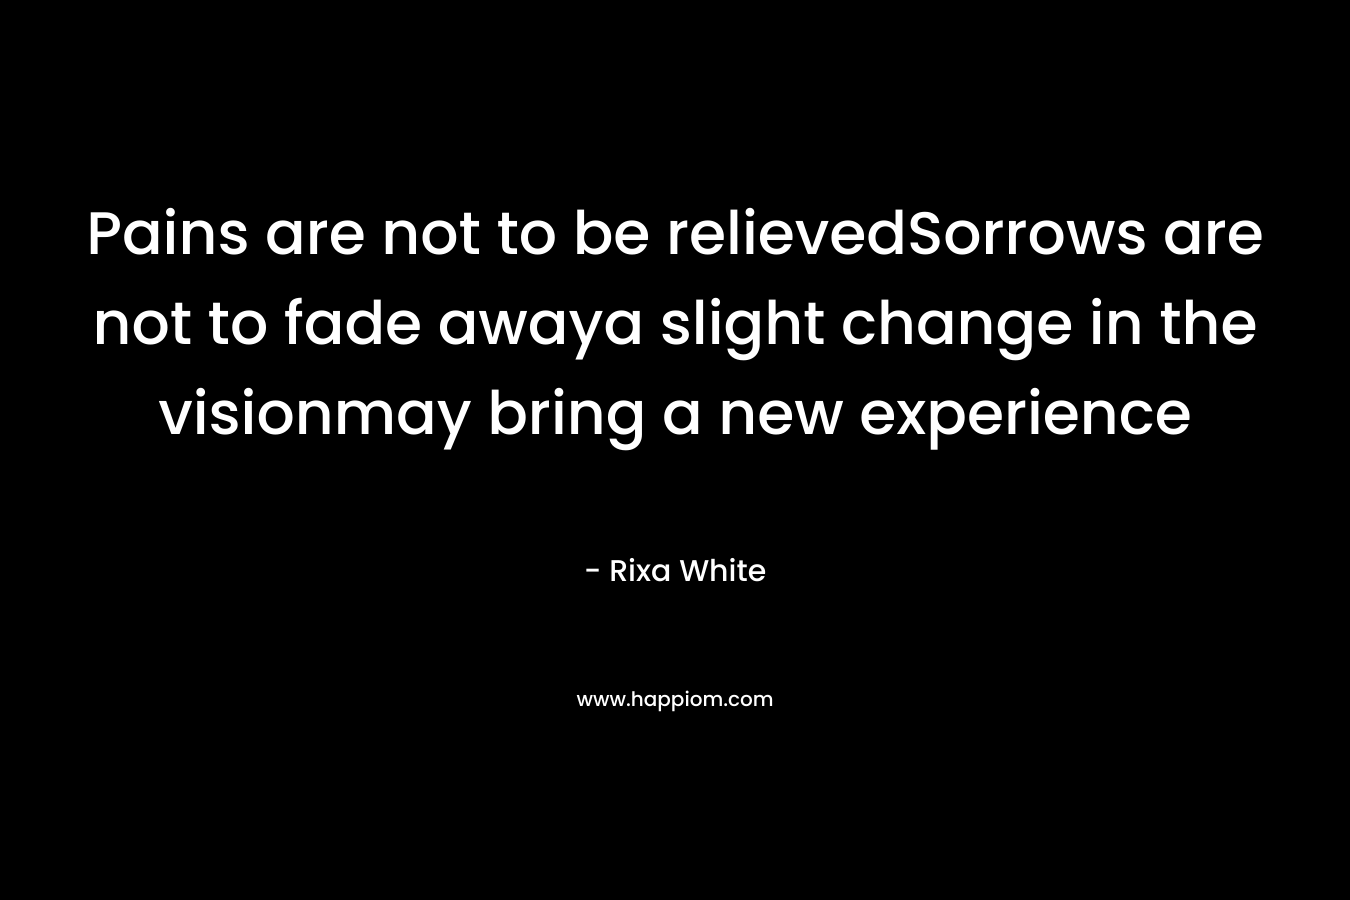 Pains are not to be relievedSorrows are not to fade awaya slight change in the visionmay bring a new experience – Rixa White